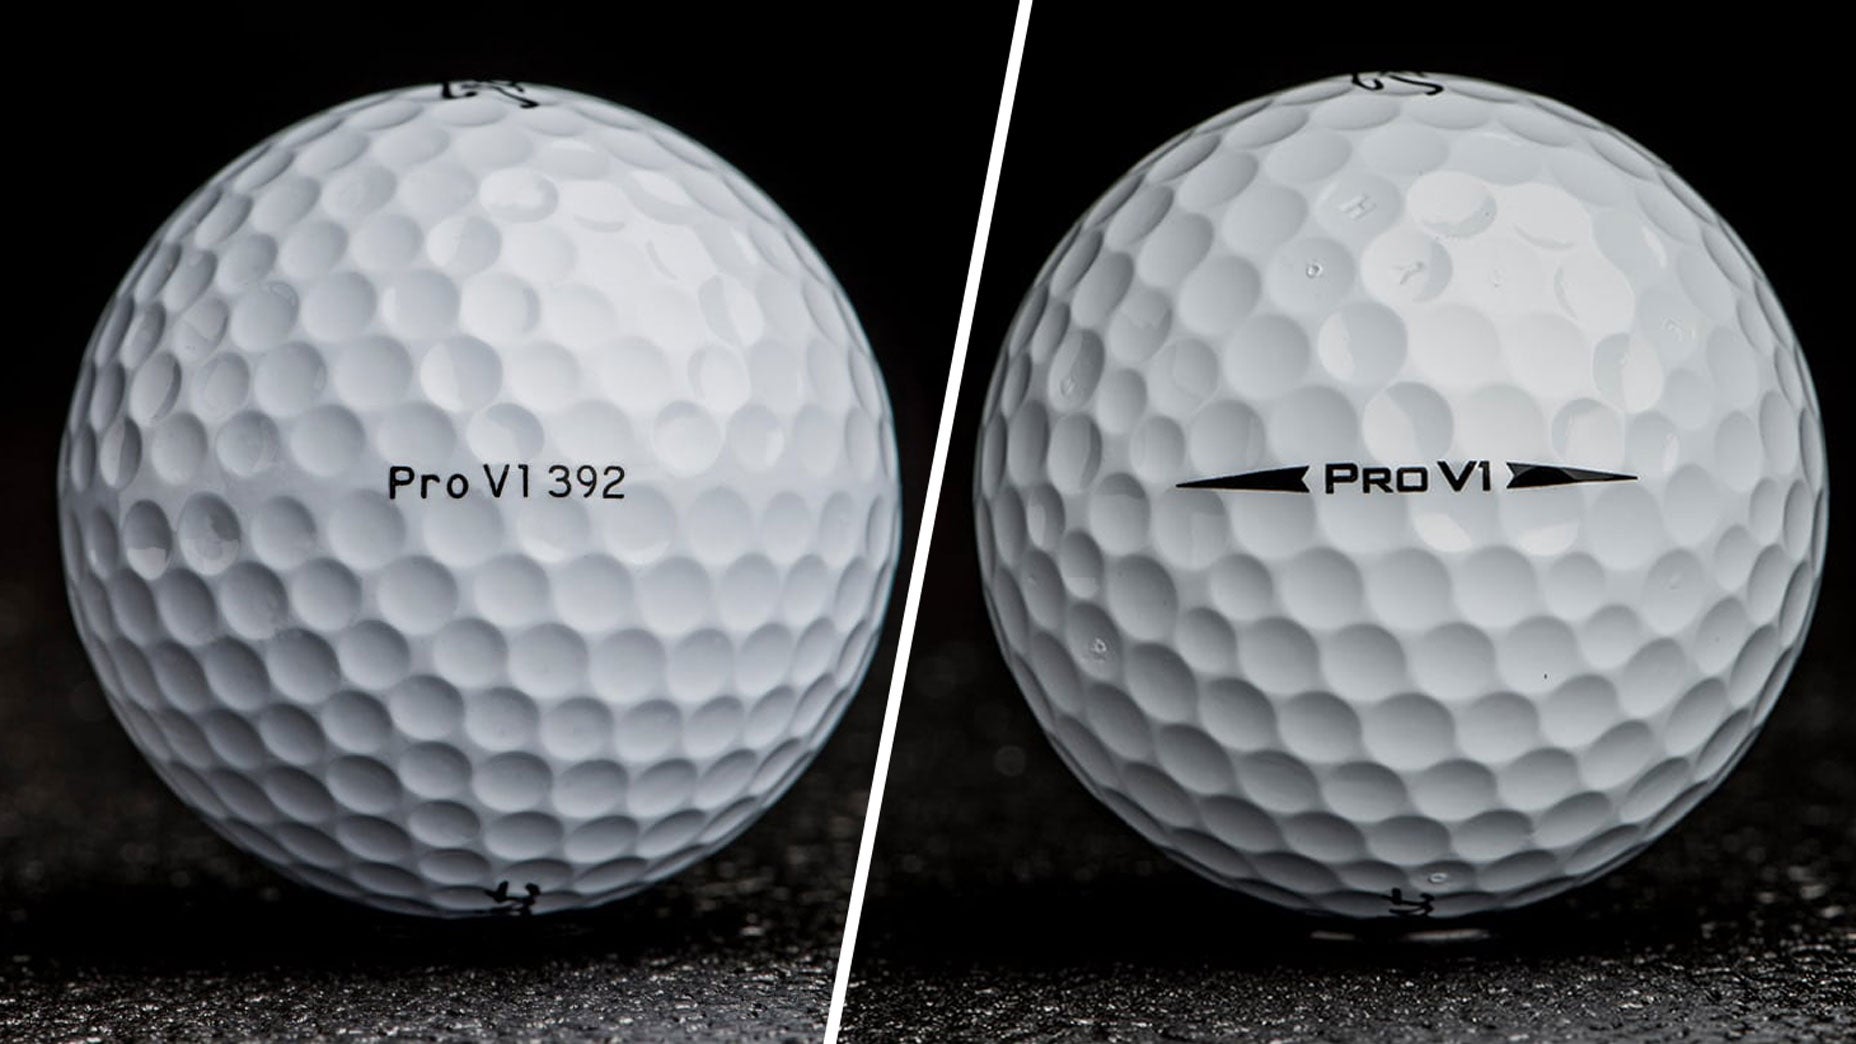 why are pro v1 so expensive